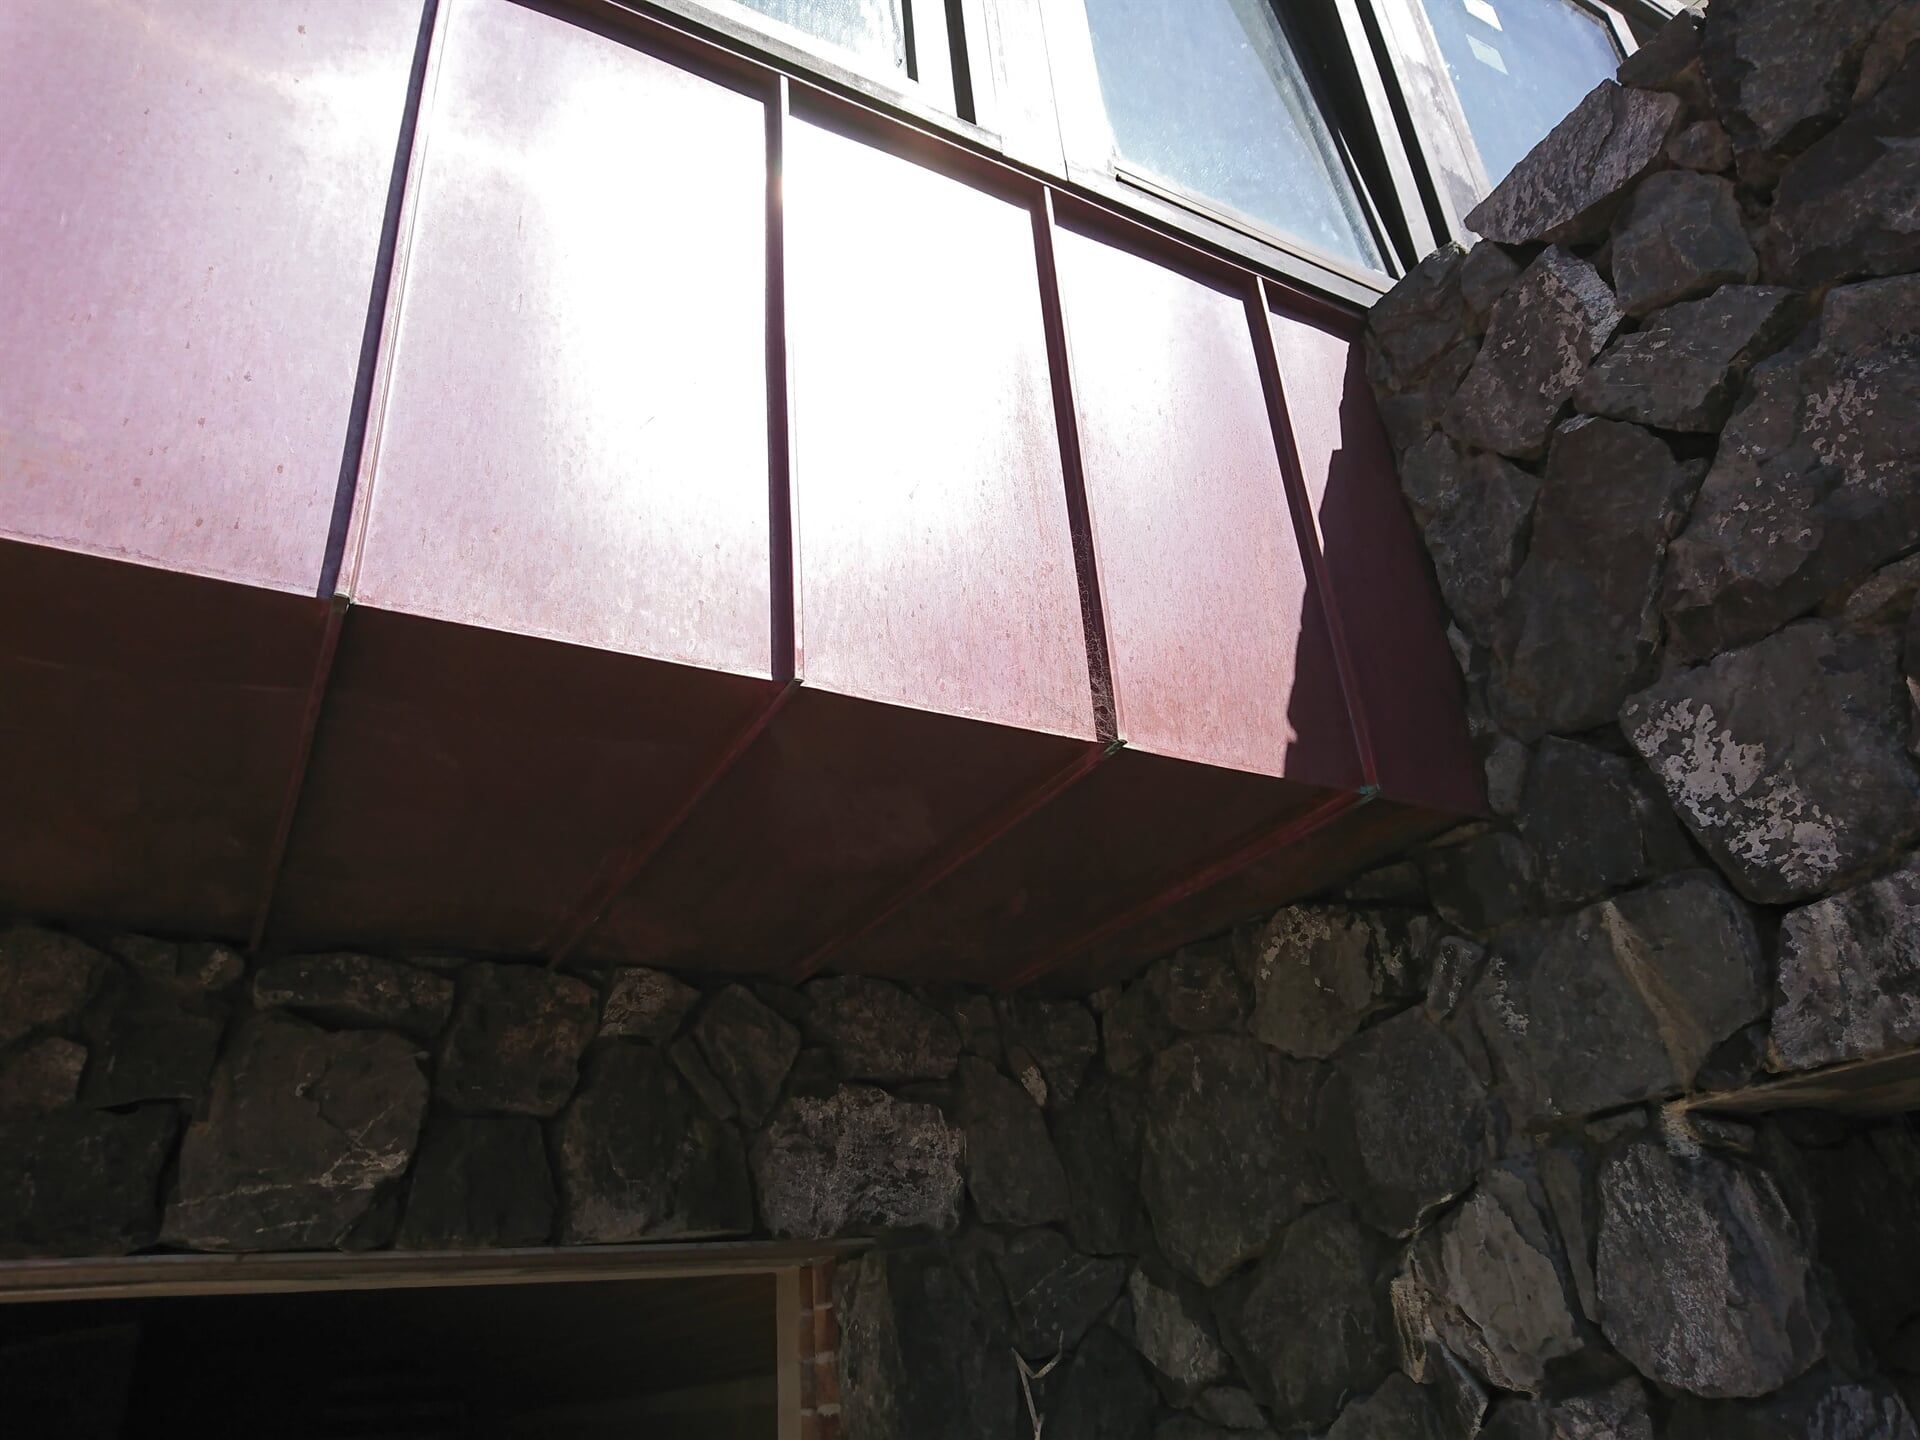 Angle Standing Seam System